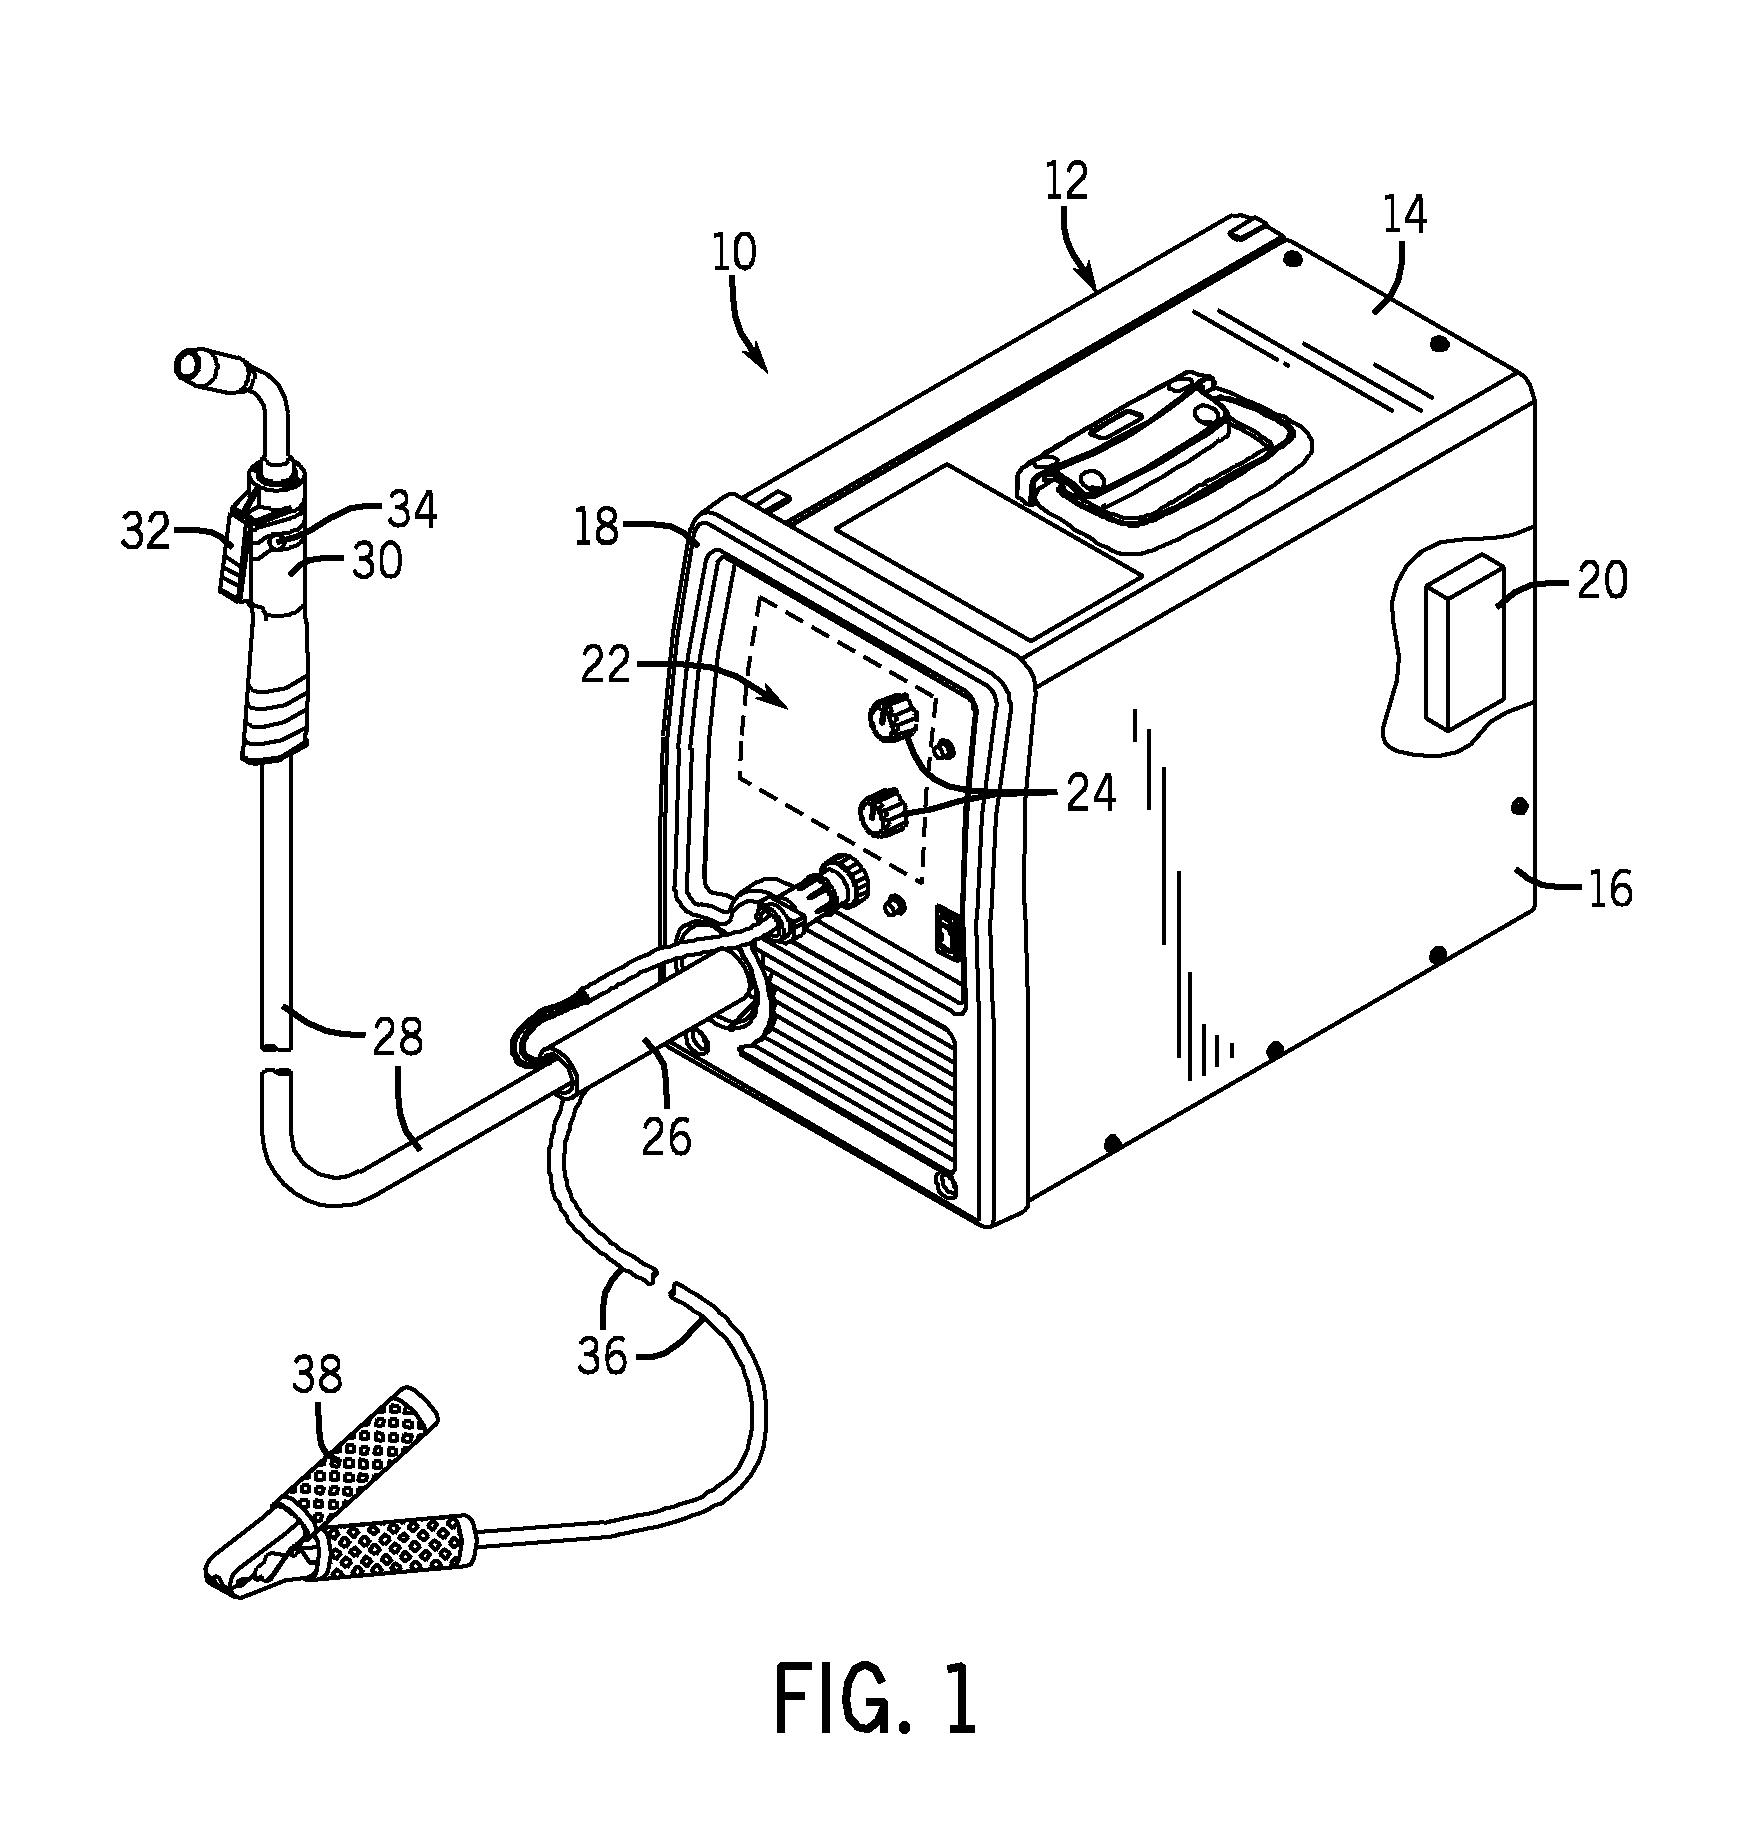 Welding wire retraction system and method